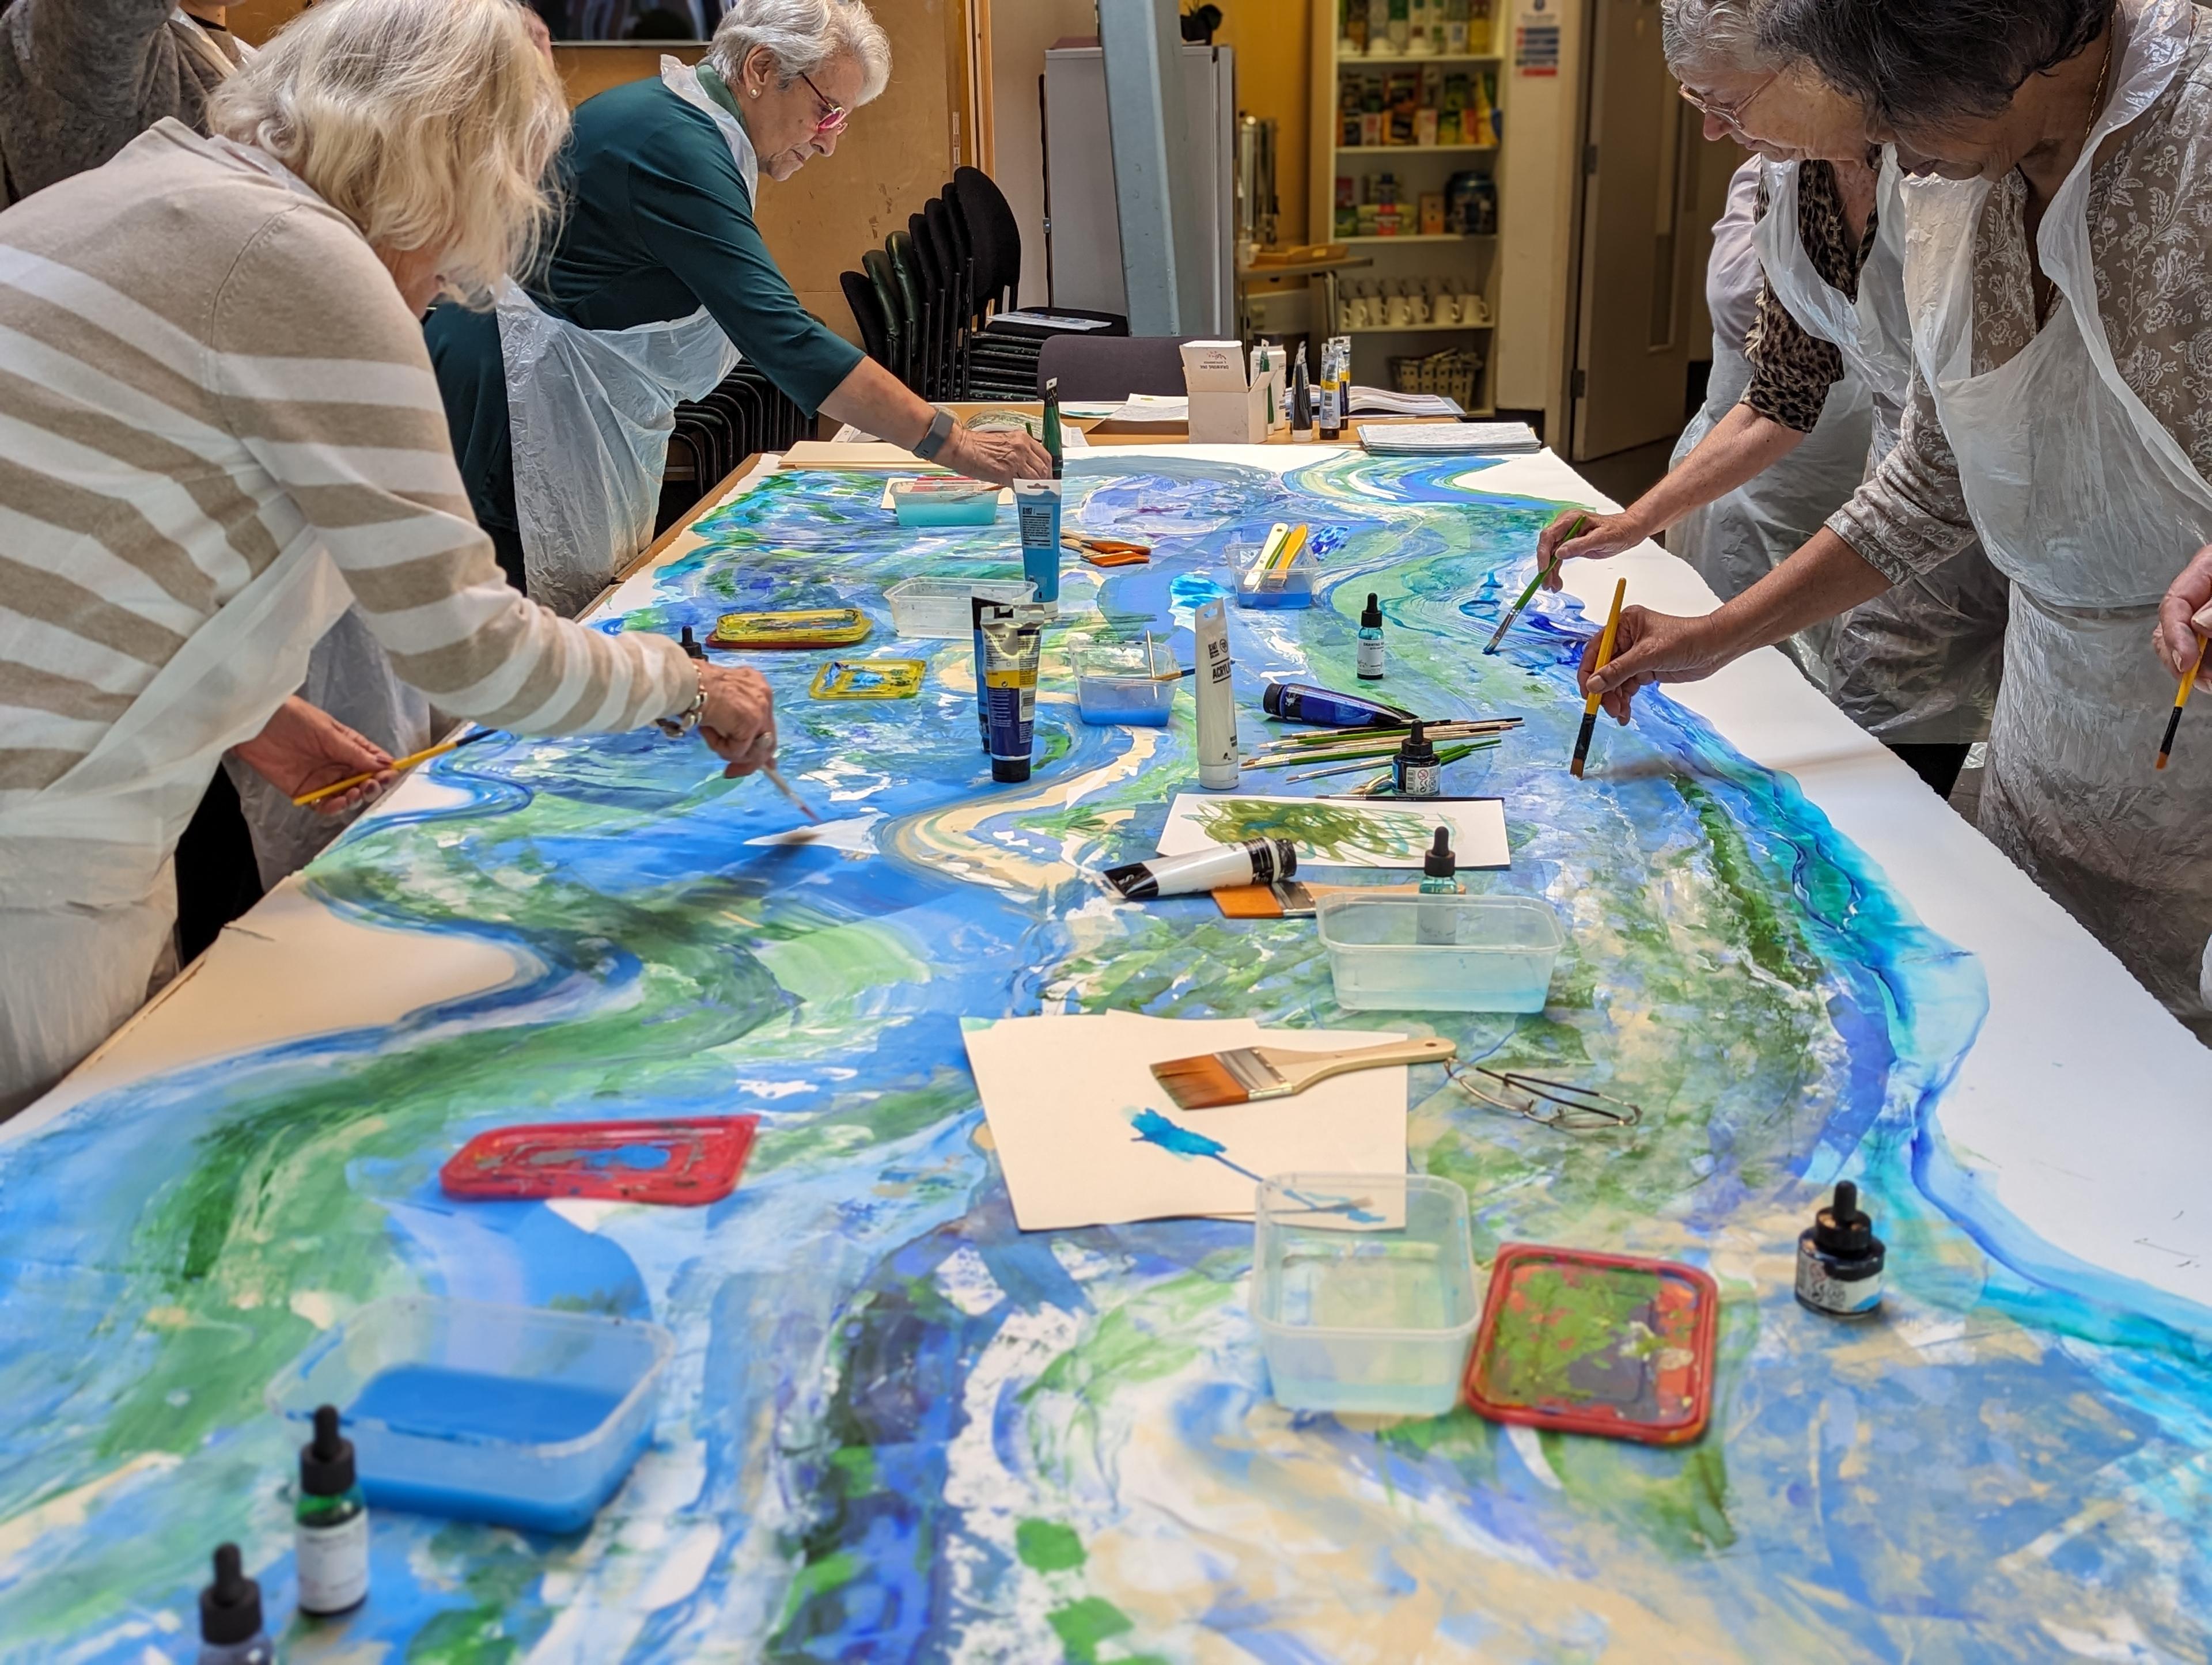 A group of four older people painting water on a single, large sheet of paper.